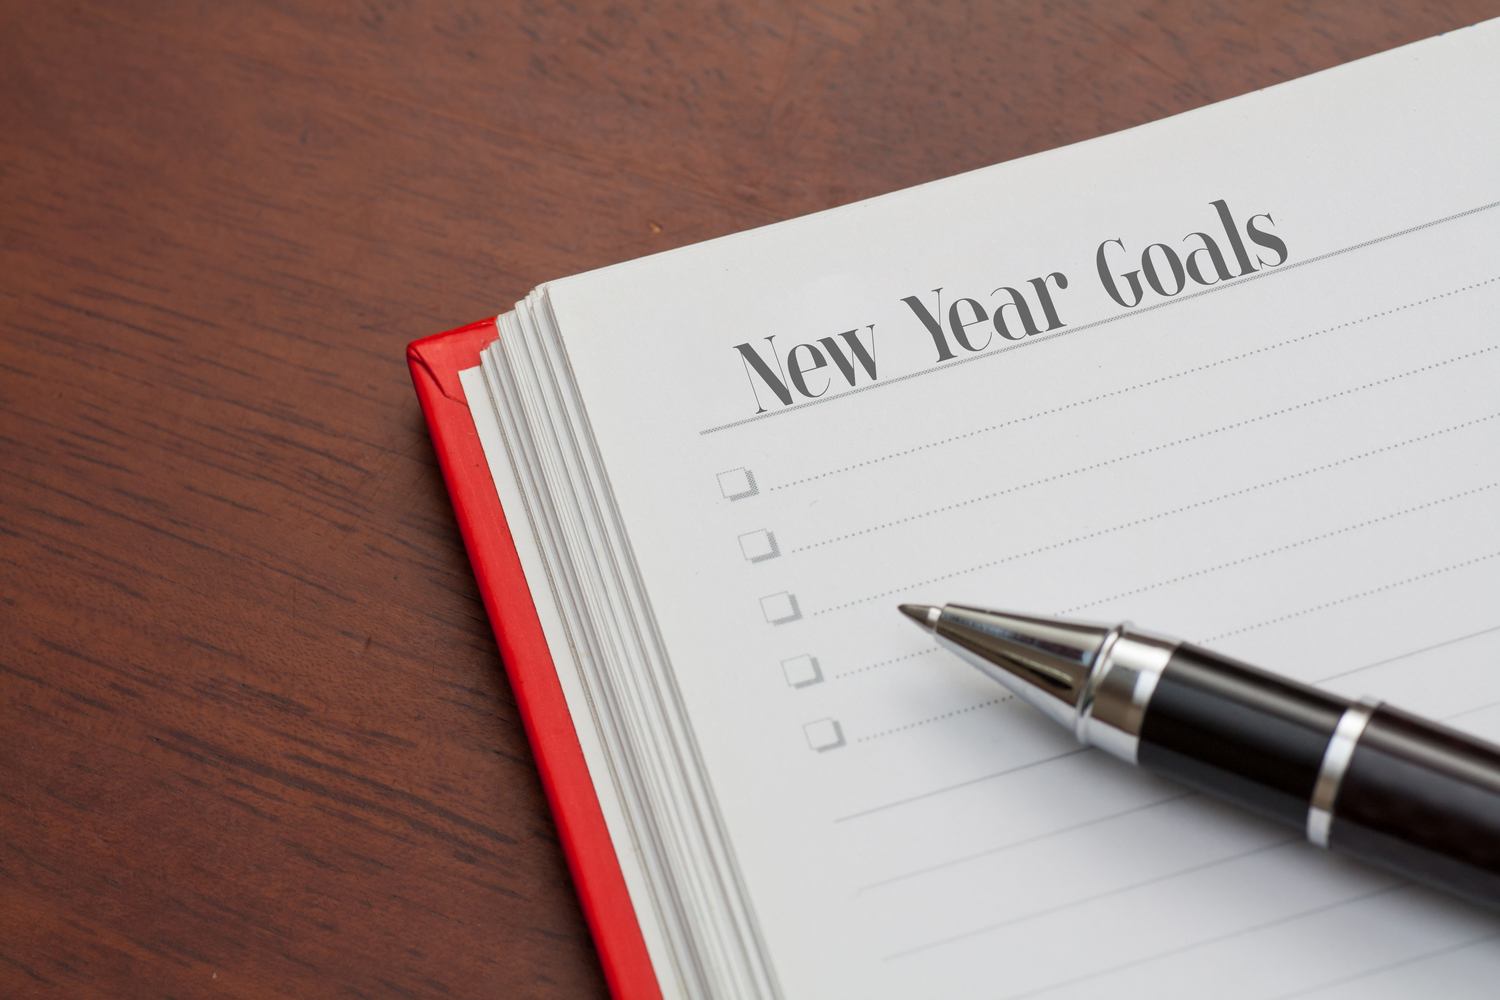 Why our New Year’s resolutions fail